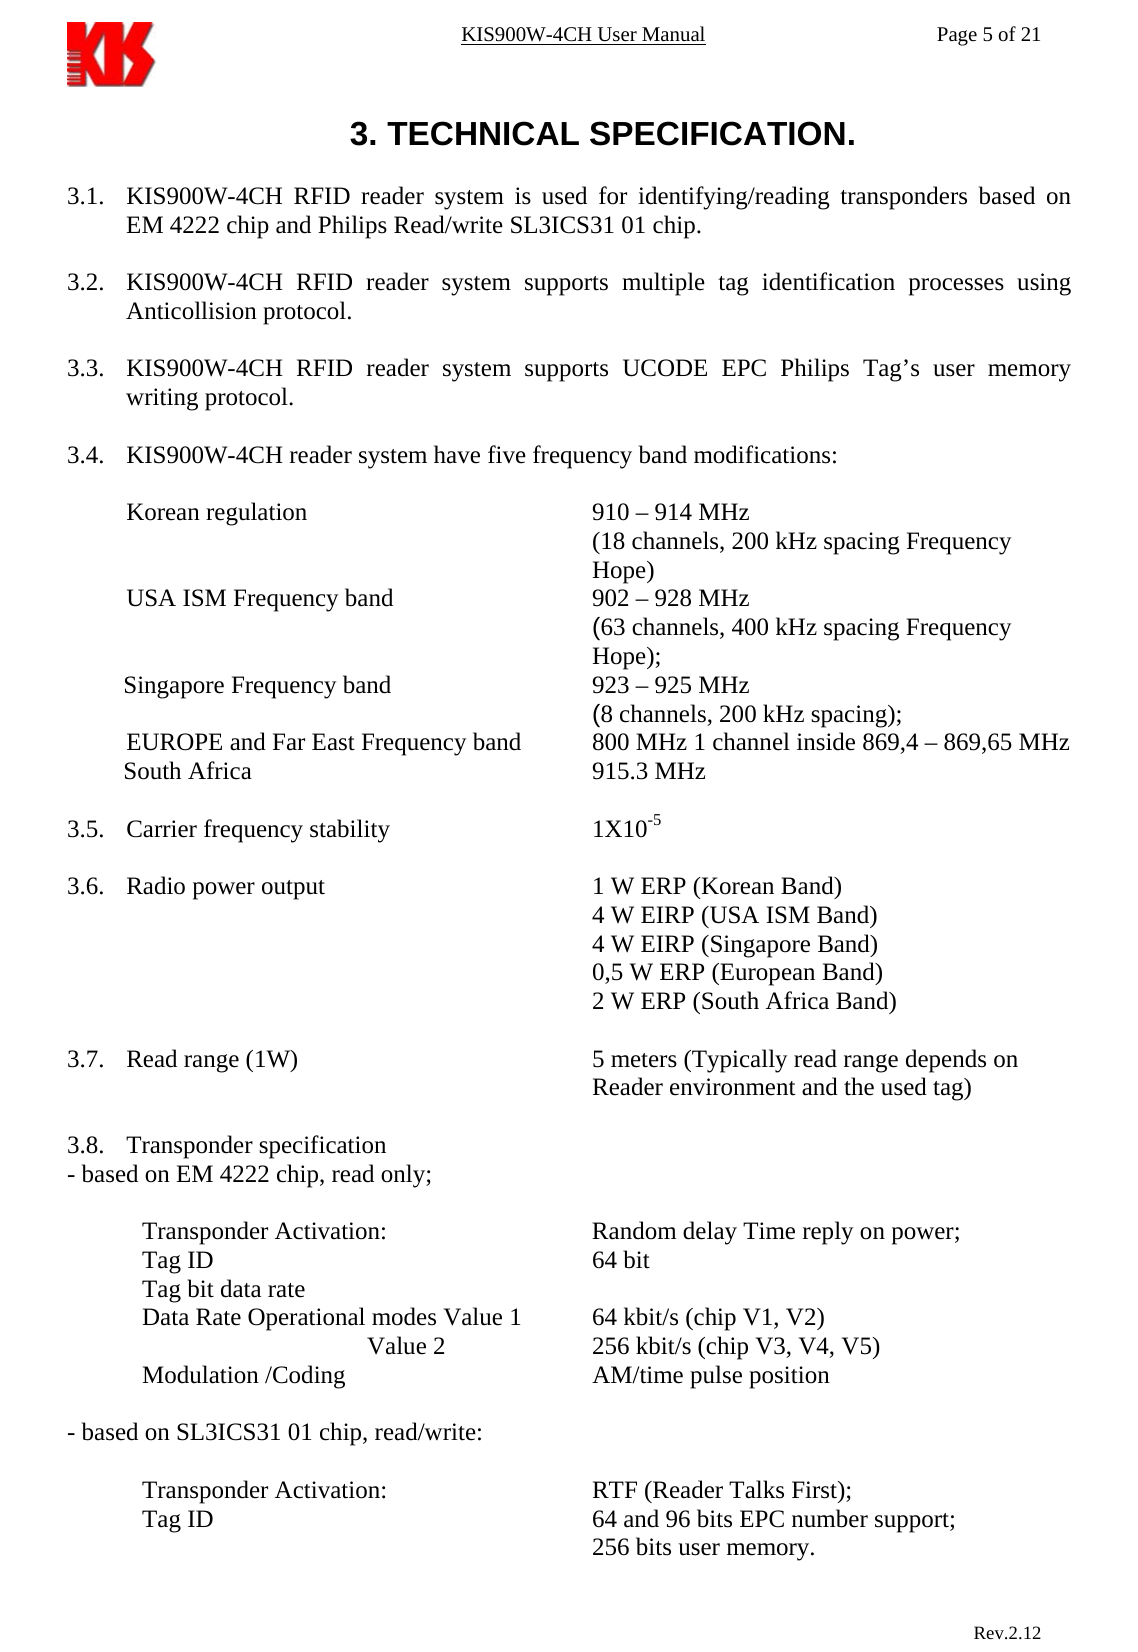 KIS900W-4CH User Manual           Page 5 of 21 3. TECHNICAL SPECIFICATION.  3.1. KIS900W-4CH RFID reader system is used for identifying/reading transponders based on EM 4222 chip and Philips Read/write SL3ICS31 01 chip.  3.2. KIS900W-4CH RFID reader system supports multiple tag identification processes using Anticollision protocol.  3.3. KIS900W-4CH RFID reader system supports UCODE EPC Philips Tag’s user memory writing protocol.  3.4. KIS900W-4CH reader system have five frequency band modifications:  Korean regulation        910 – 914 MHz (18 channels, 200 kHz spacing Frequency Hope) USA ISM Frequency band      902 – 928 MHz (63 channels, 400 kHz spacing Frequency Hope); Singapore Frequency band       923 – 925 MHz (8 channels, 200 kHz spacing); EUROPE and Far East Frequency band   800 MHz 1 channel inside 869,4 – 869,65 MHz South Africa     915.3 MHz  3.5. Carrier frequency stability      1X10-5  3.6. Radio power output        1 W ERP (Korean Band) 4 W EIRP (USA ISM Band) 4 W EIRP (Singapore Band) 0,5 W ERP (European Band) 2 W ERP (South Africa Band)  3.7. Read range (1W)        5 meters (Typically read range depends on Reader environment and the used tag)  3.8. Transponder specification    - based on EM 4222 chip, read only;  Transponder Activation:    Random delay Time reply on power;Tag ID      64 bit Tag bit data rate     Data Rate Operational modes Value 1  64 kbit/s (chip V1, V2)         Value 2    256 kbit/s (chip V3, V4, V5) Modulation /Coding    AM/time pulse position  - based on SL3ICS31 01 chip, read/write:  Transponder Activation:       RTF (Reader Talks First);Tag ID           64 and 96 bits EPC number support;                            Rev.2.12       256 bits user memory. 